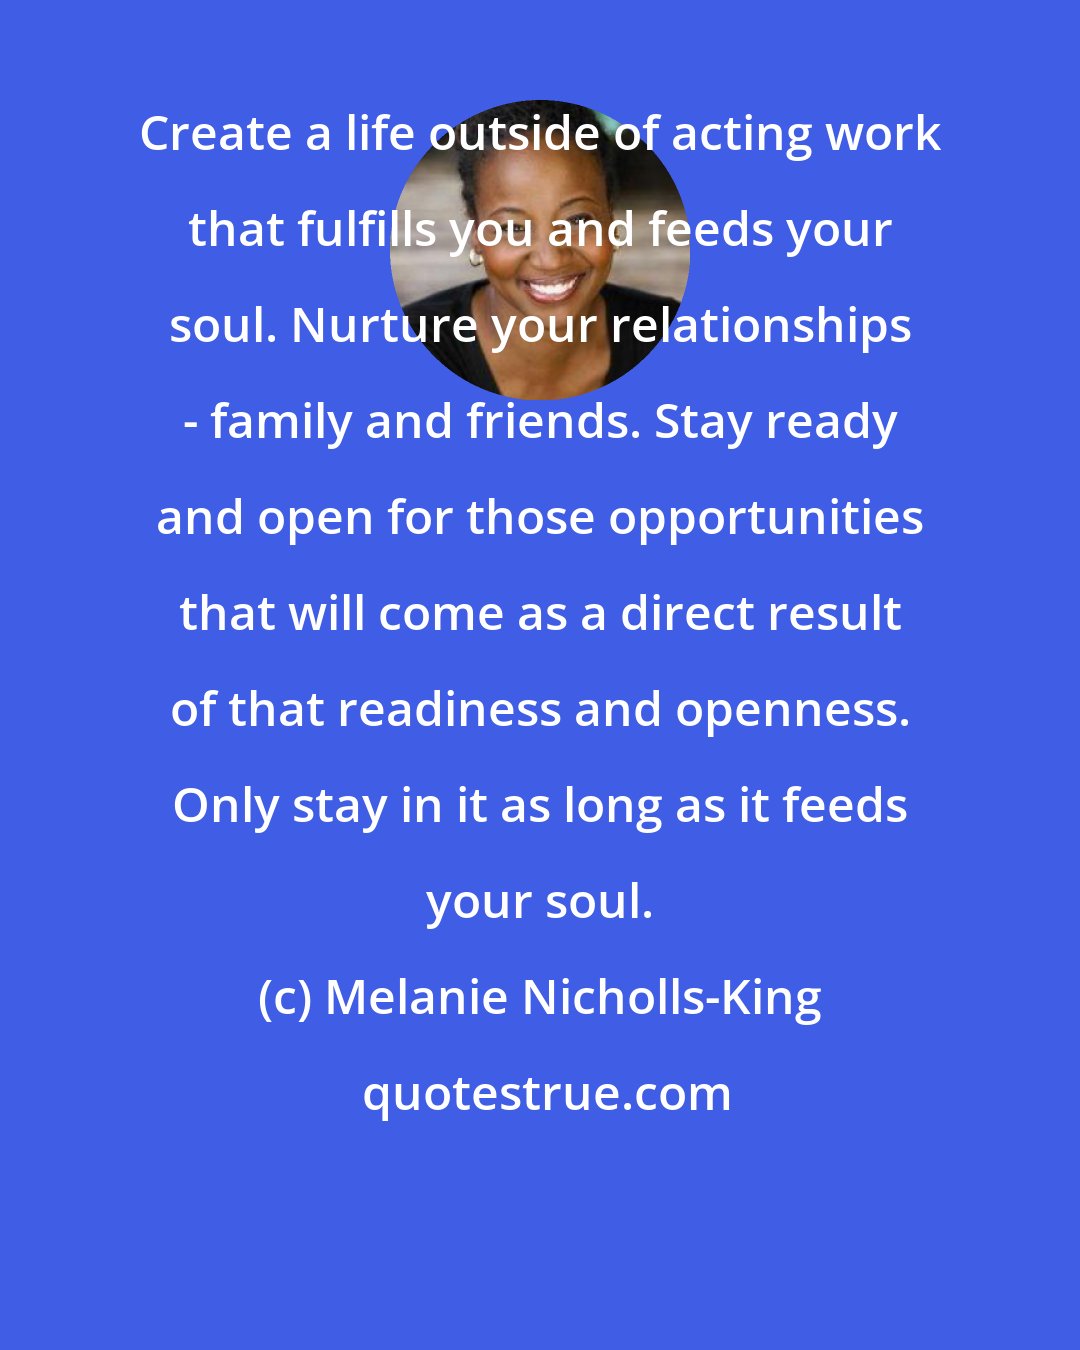 Melanie Nicholls-King: Create a life outside of acting work that fulfills you and feeds your soul. Nurture your relationships - family and friends. Stay ready and open for those opportunities that will come as a direct result of that readiness and openness. Only stay in it as long as it feeds your soul.